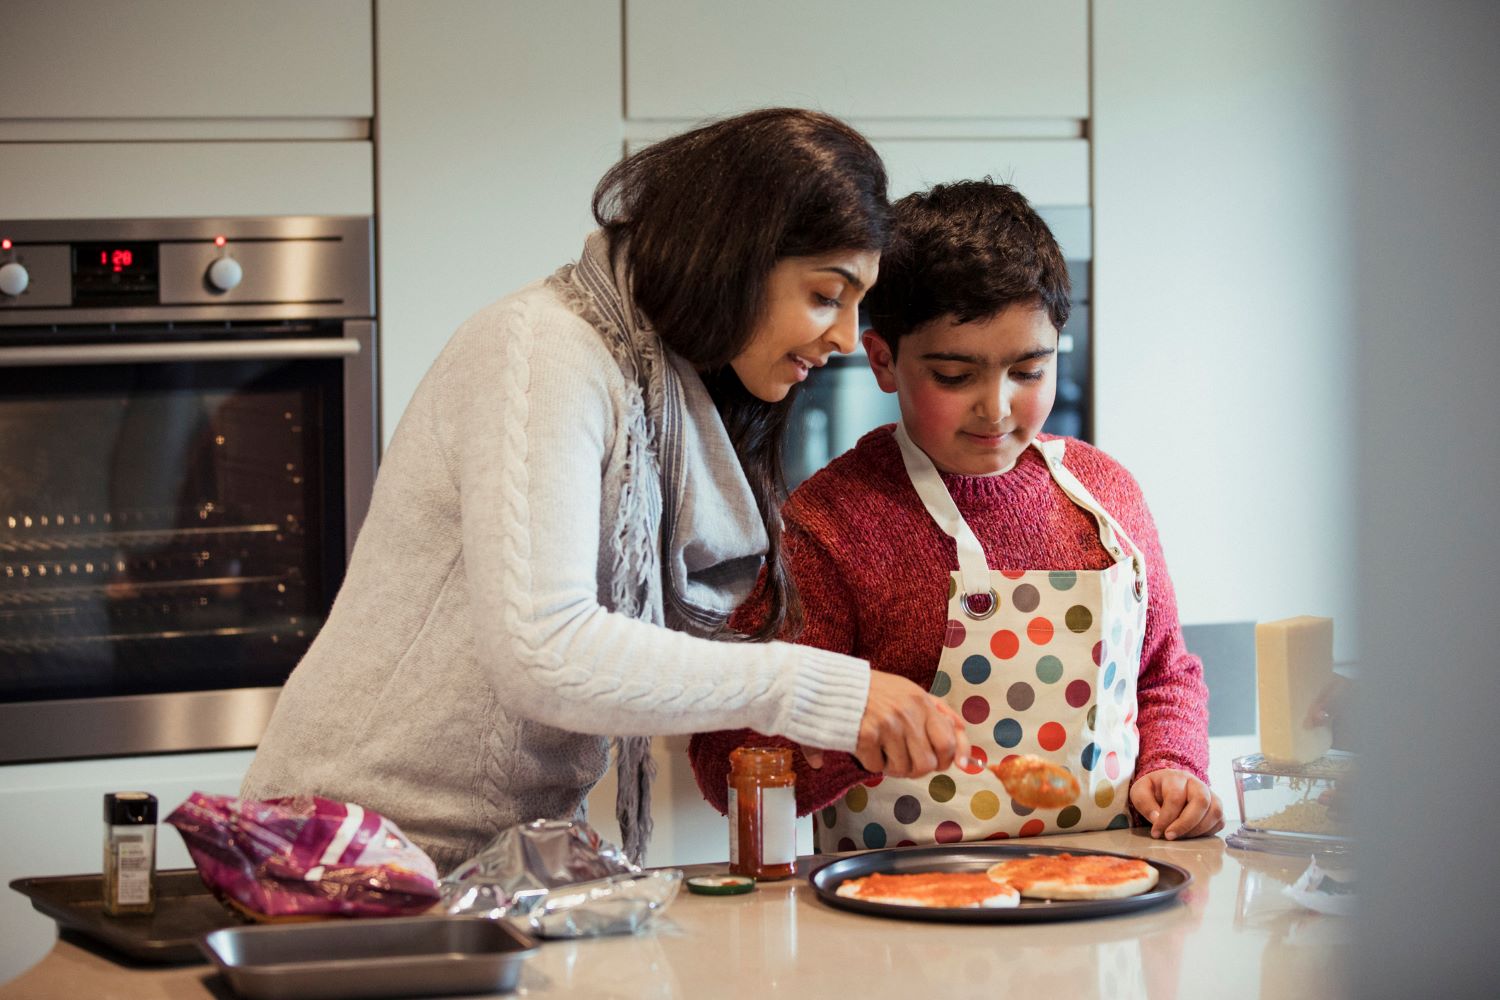 What are the difficulties for autistic children at mealtimes?